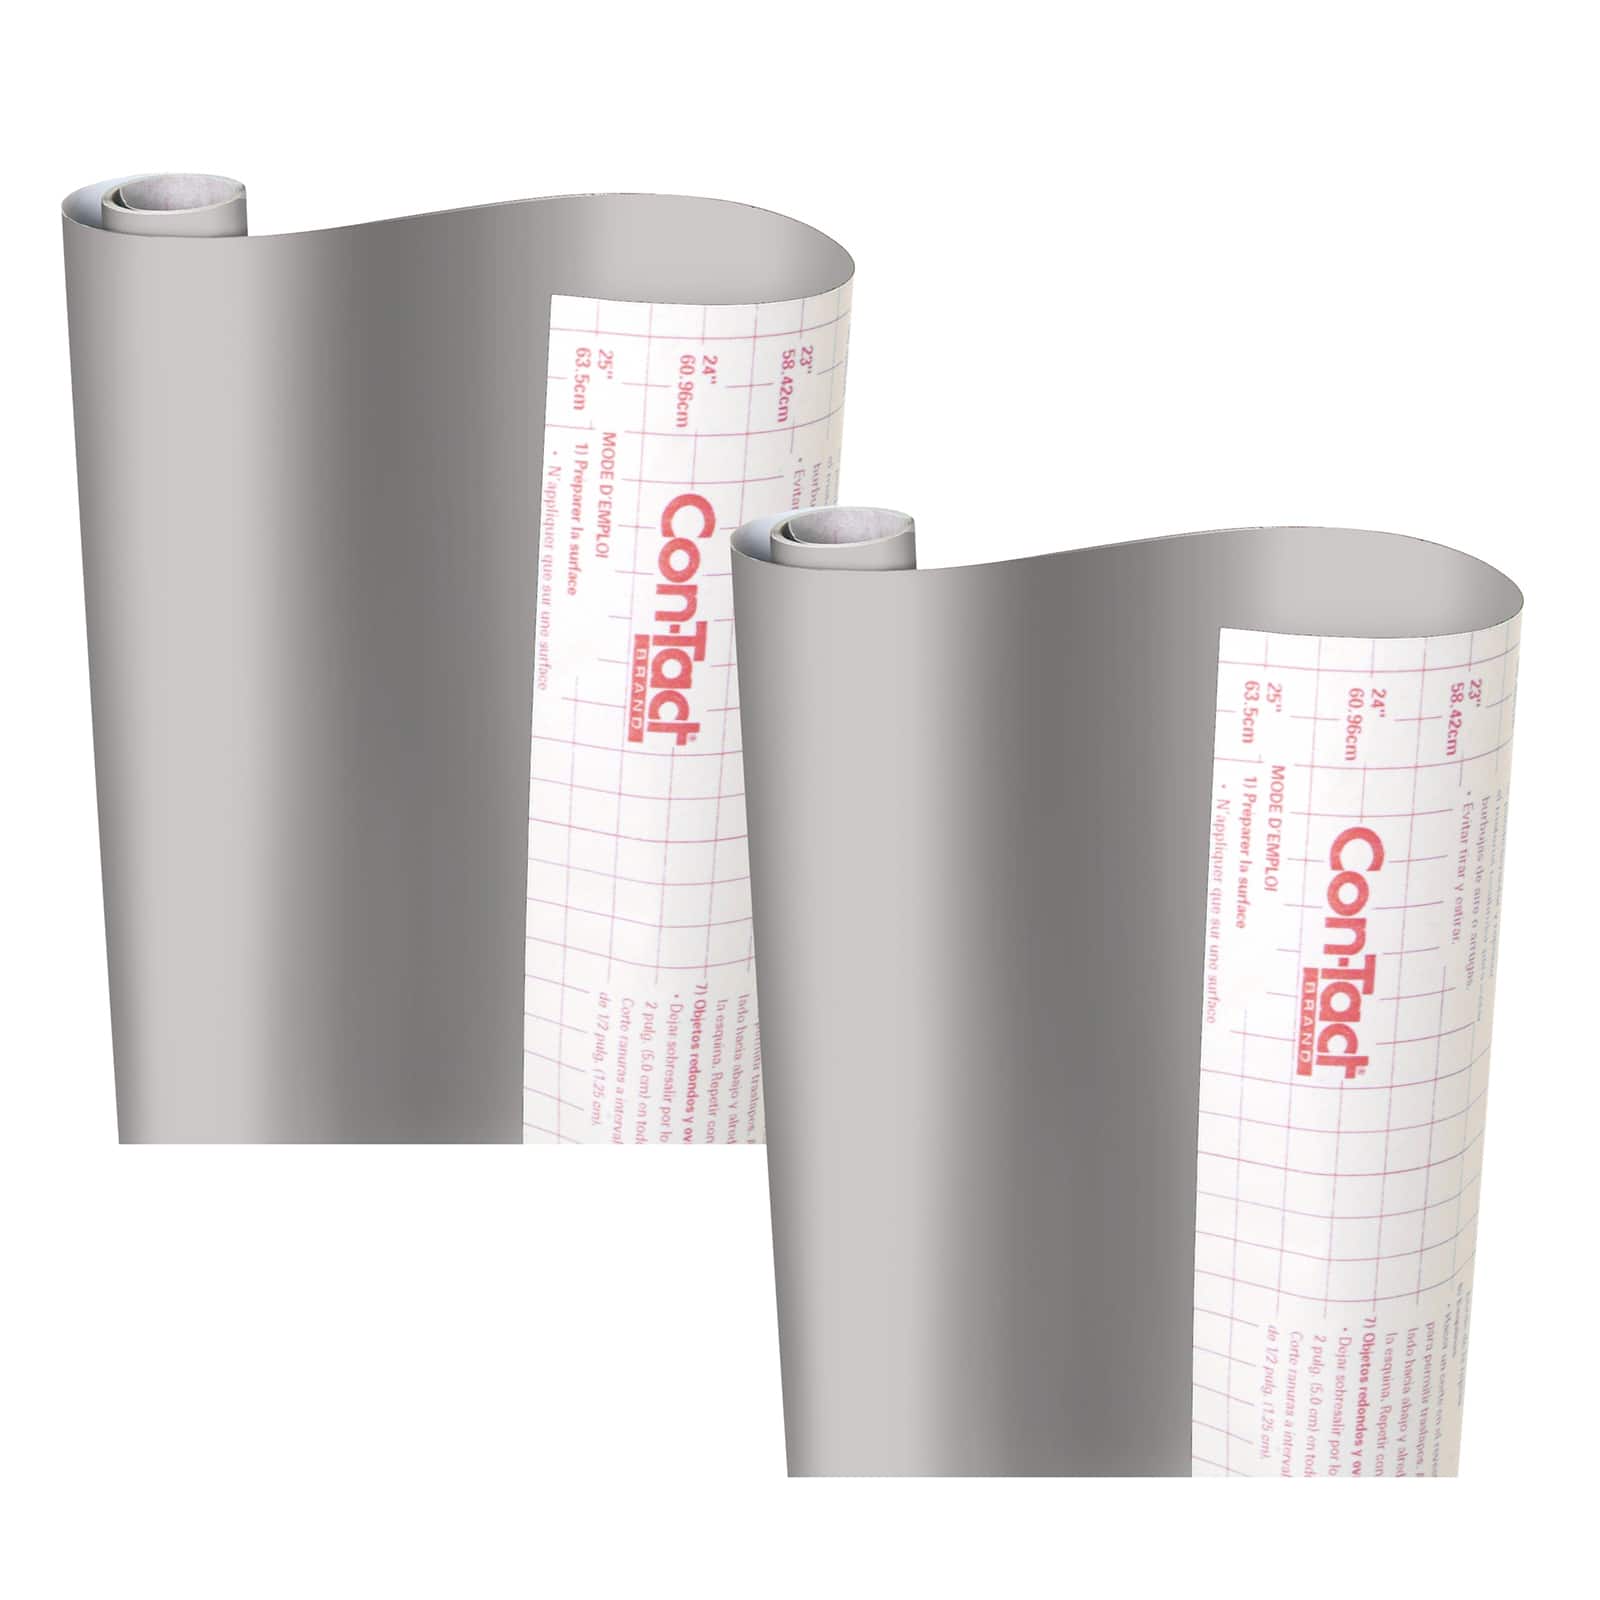 Con-Tact Creative Covering™ Adhesive Covering, 18" x 16 ft.